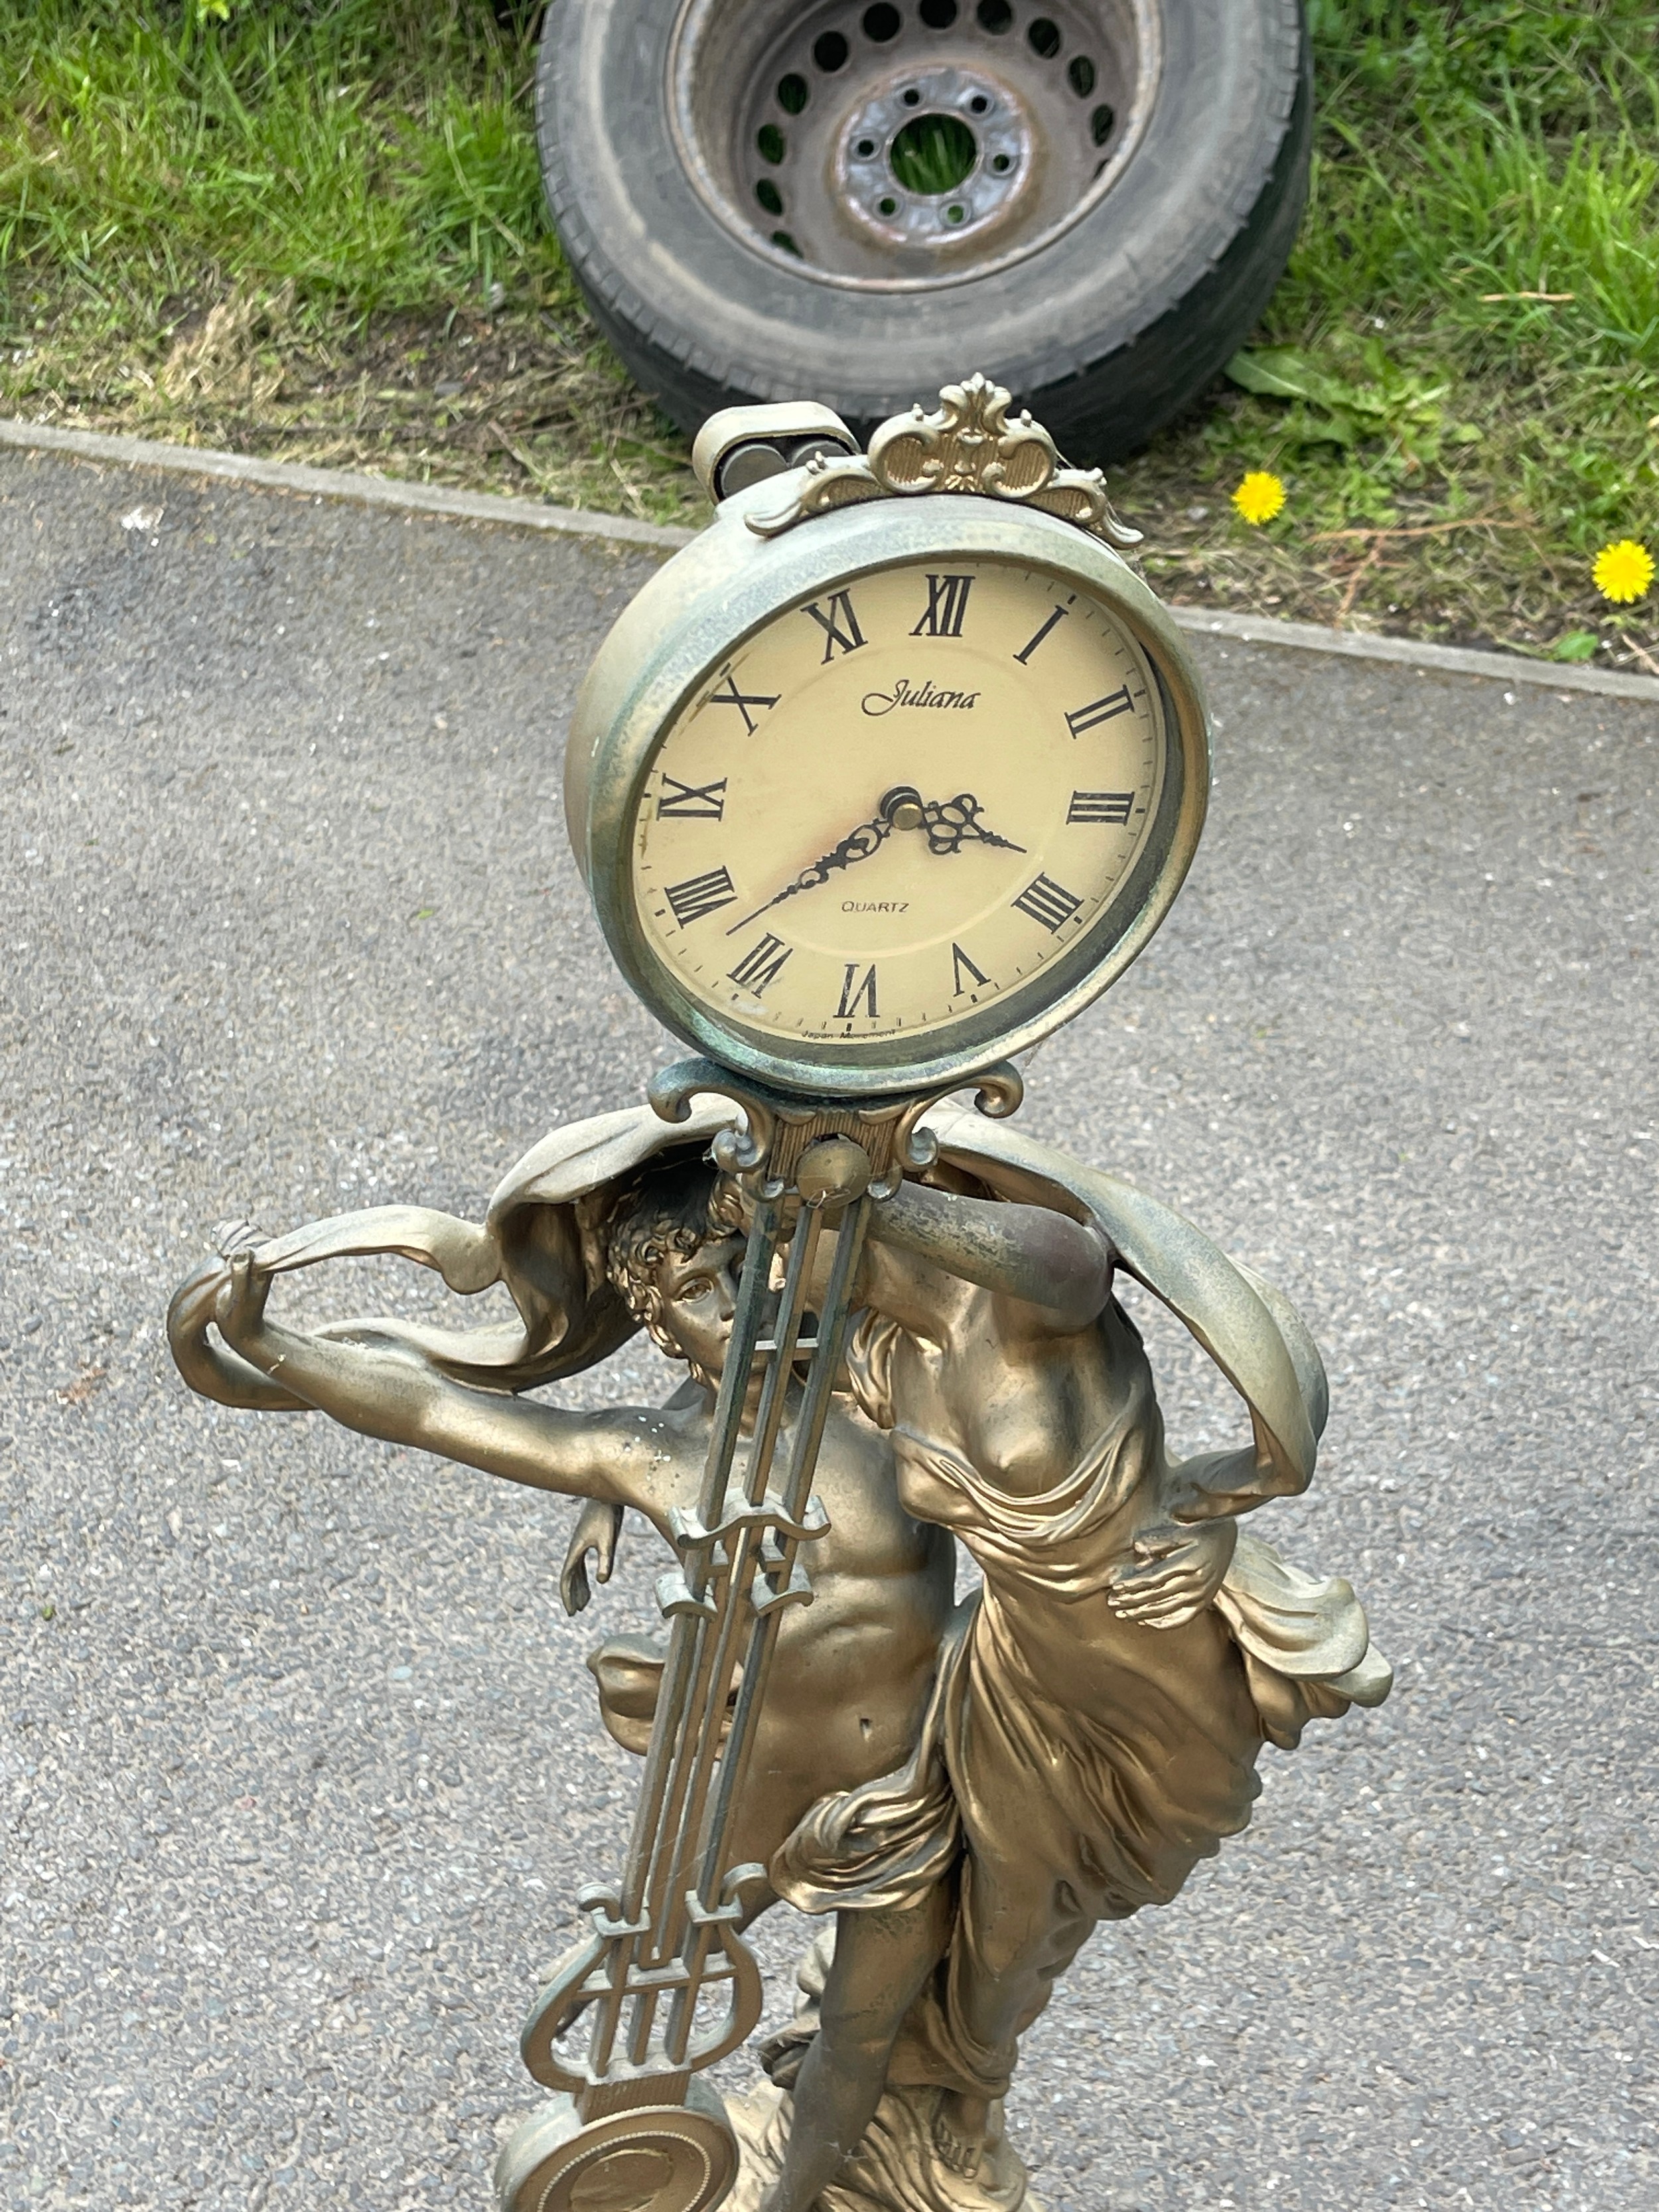 Art deco style lady clock, 36 inches tall - Image 2 of 3